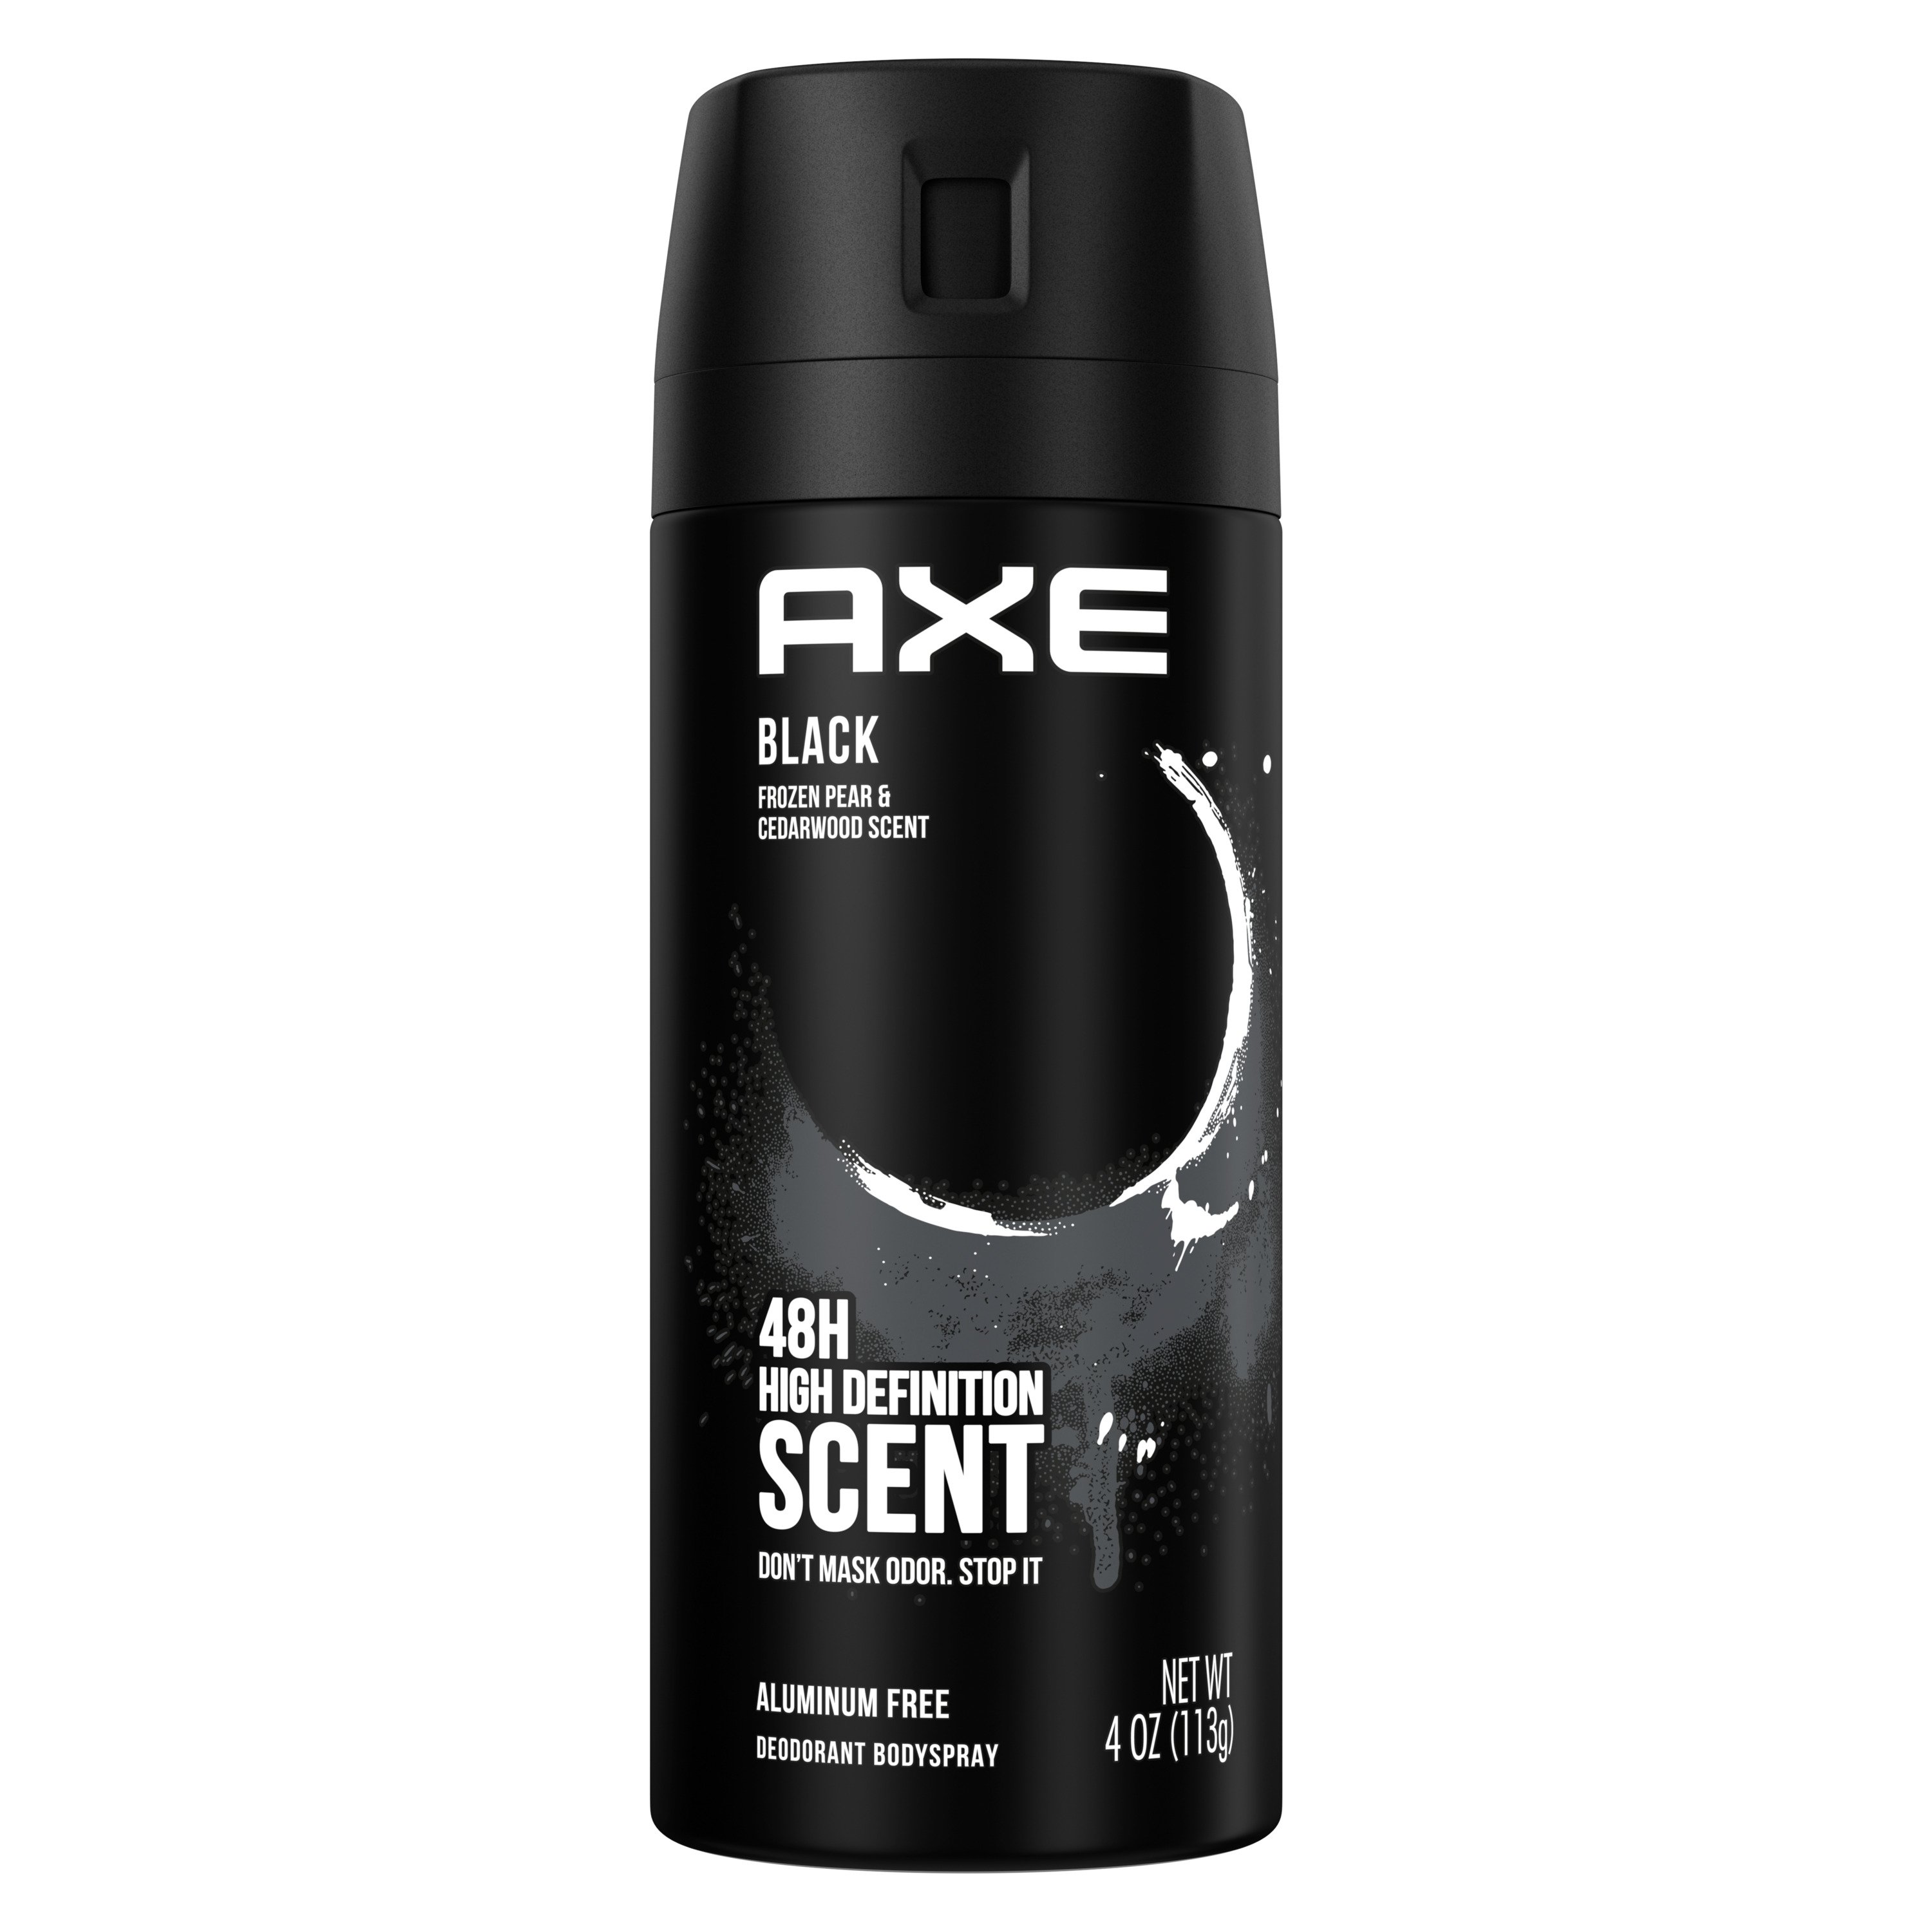 Inzet Woud Spectaculair AXE Body Spray Deodorant for Men - Black - Shop Bath & Skin Care at H-E-B